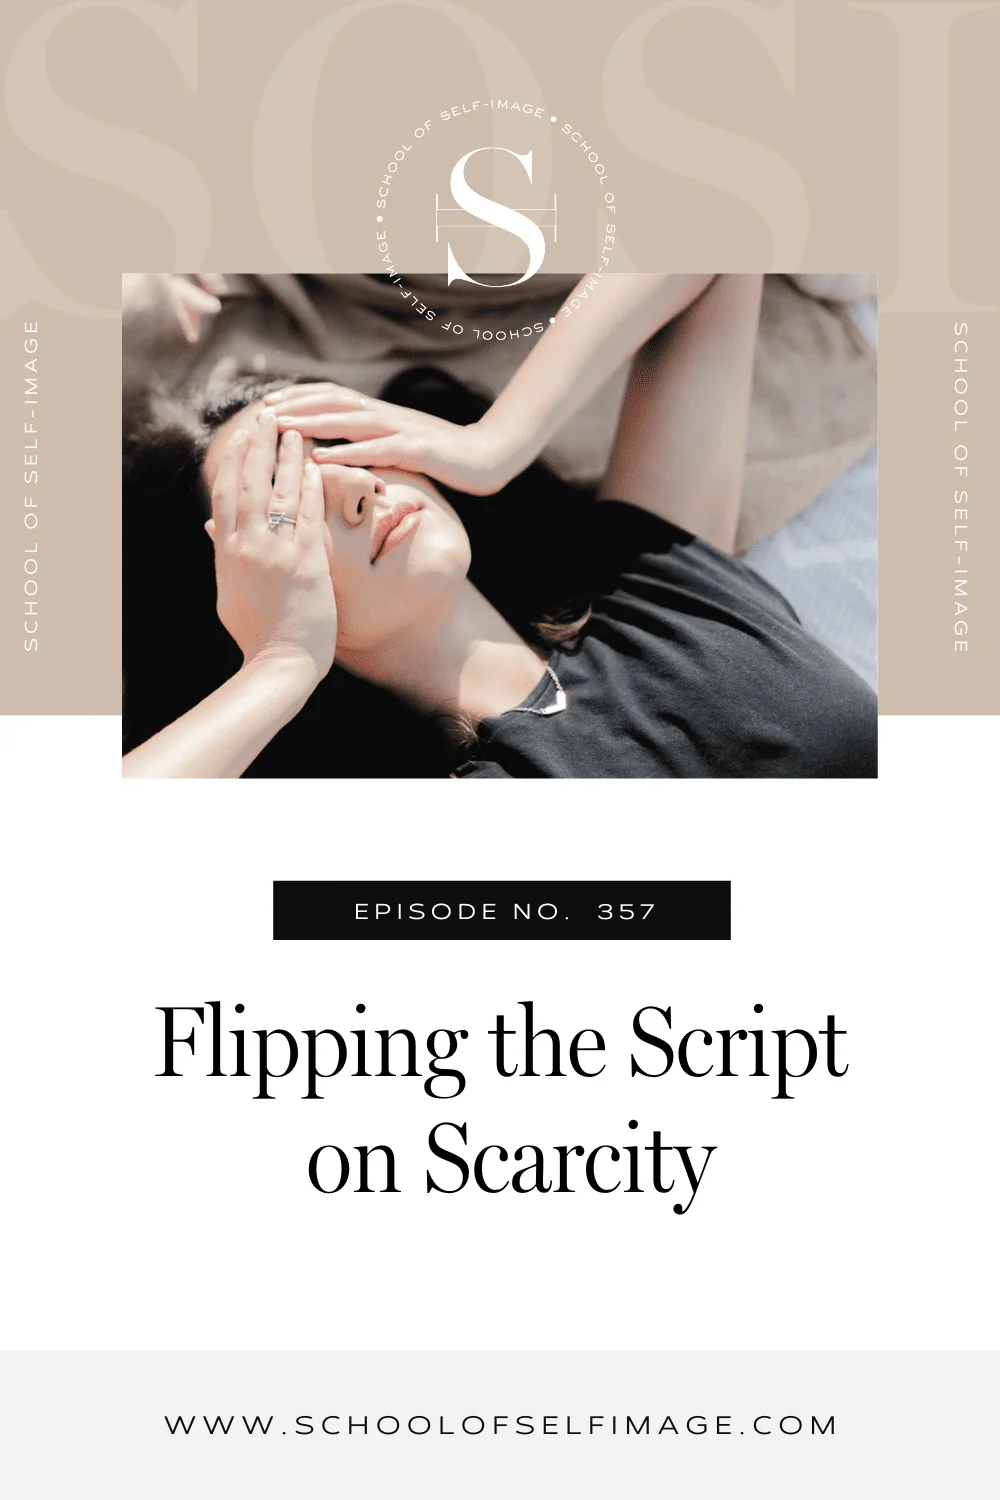 Flipping the Script on Scarcity